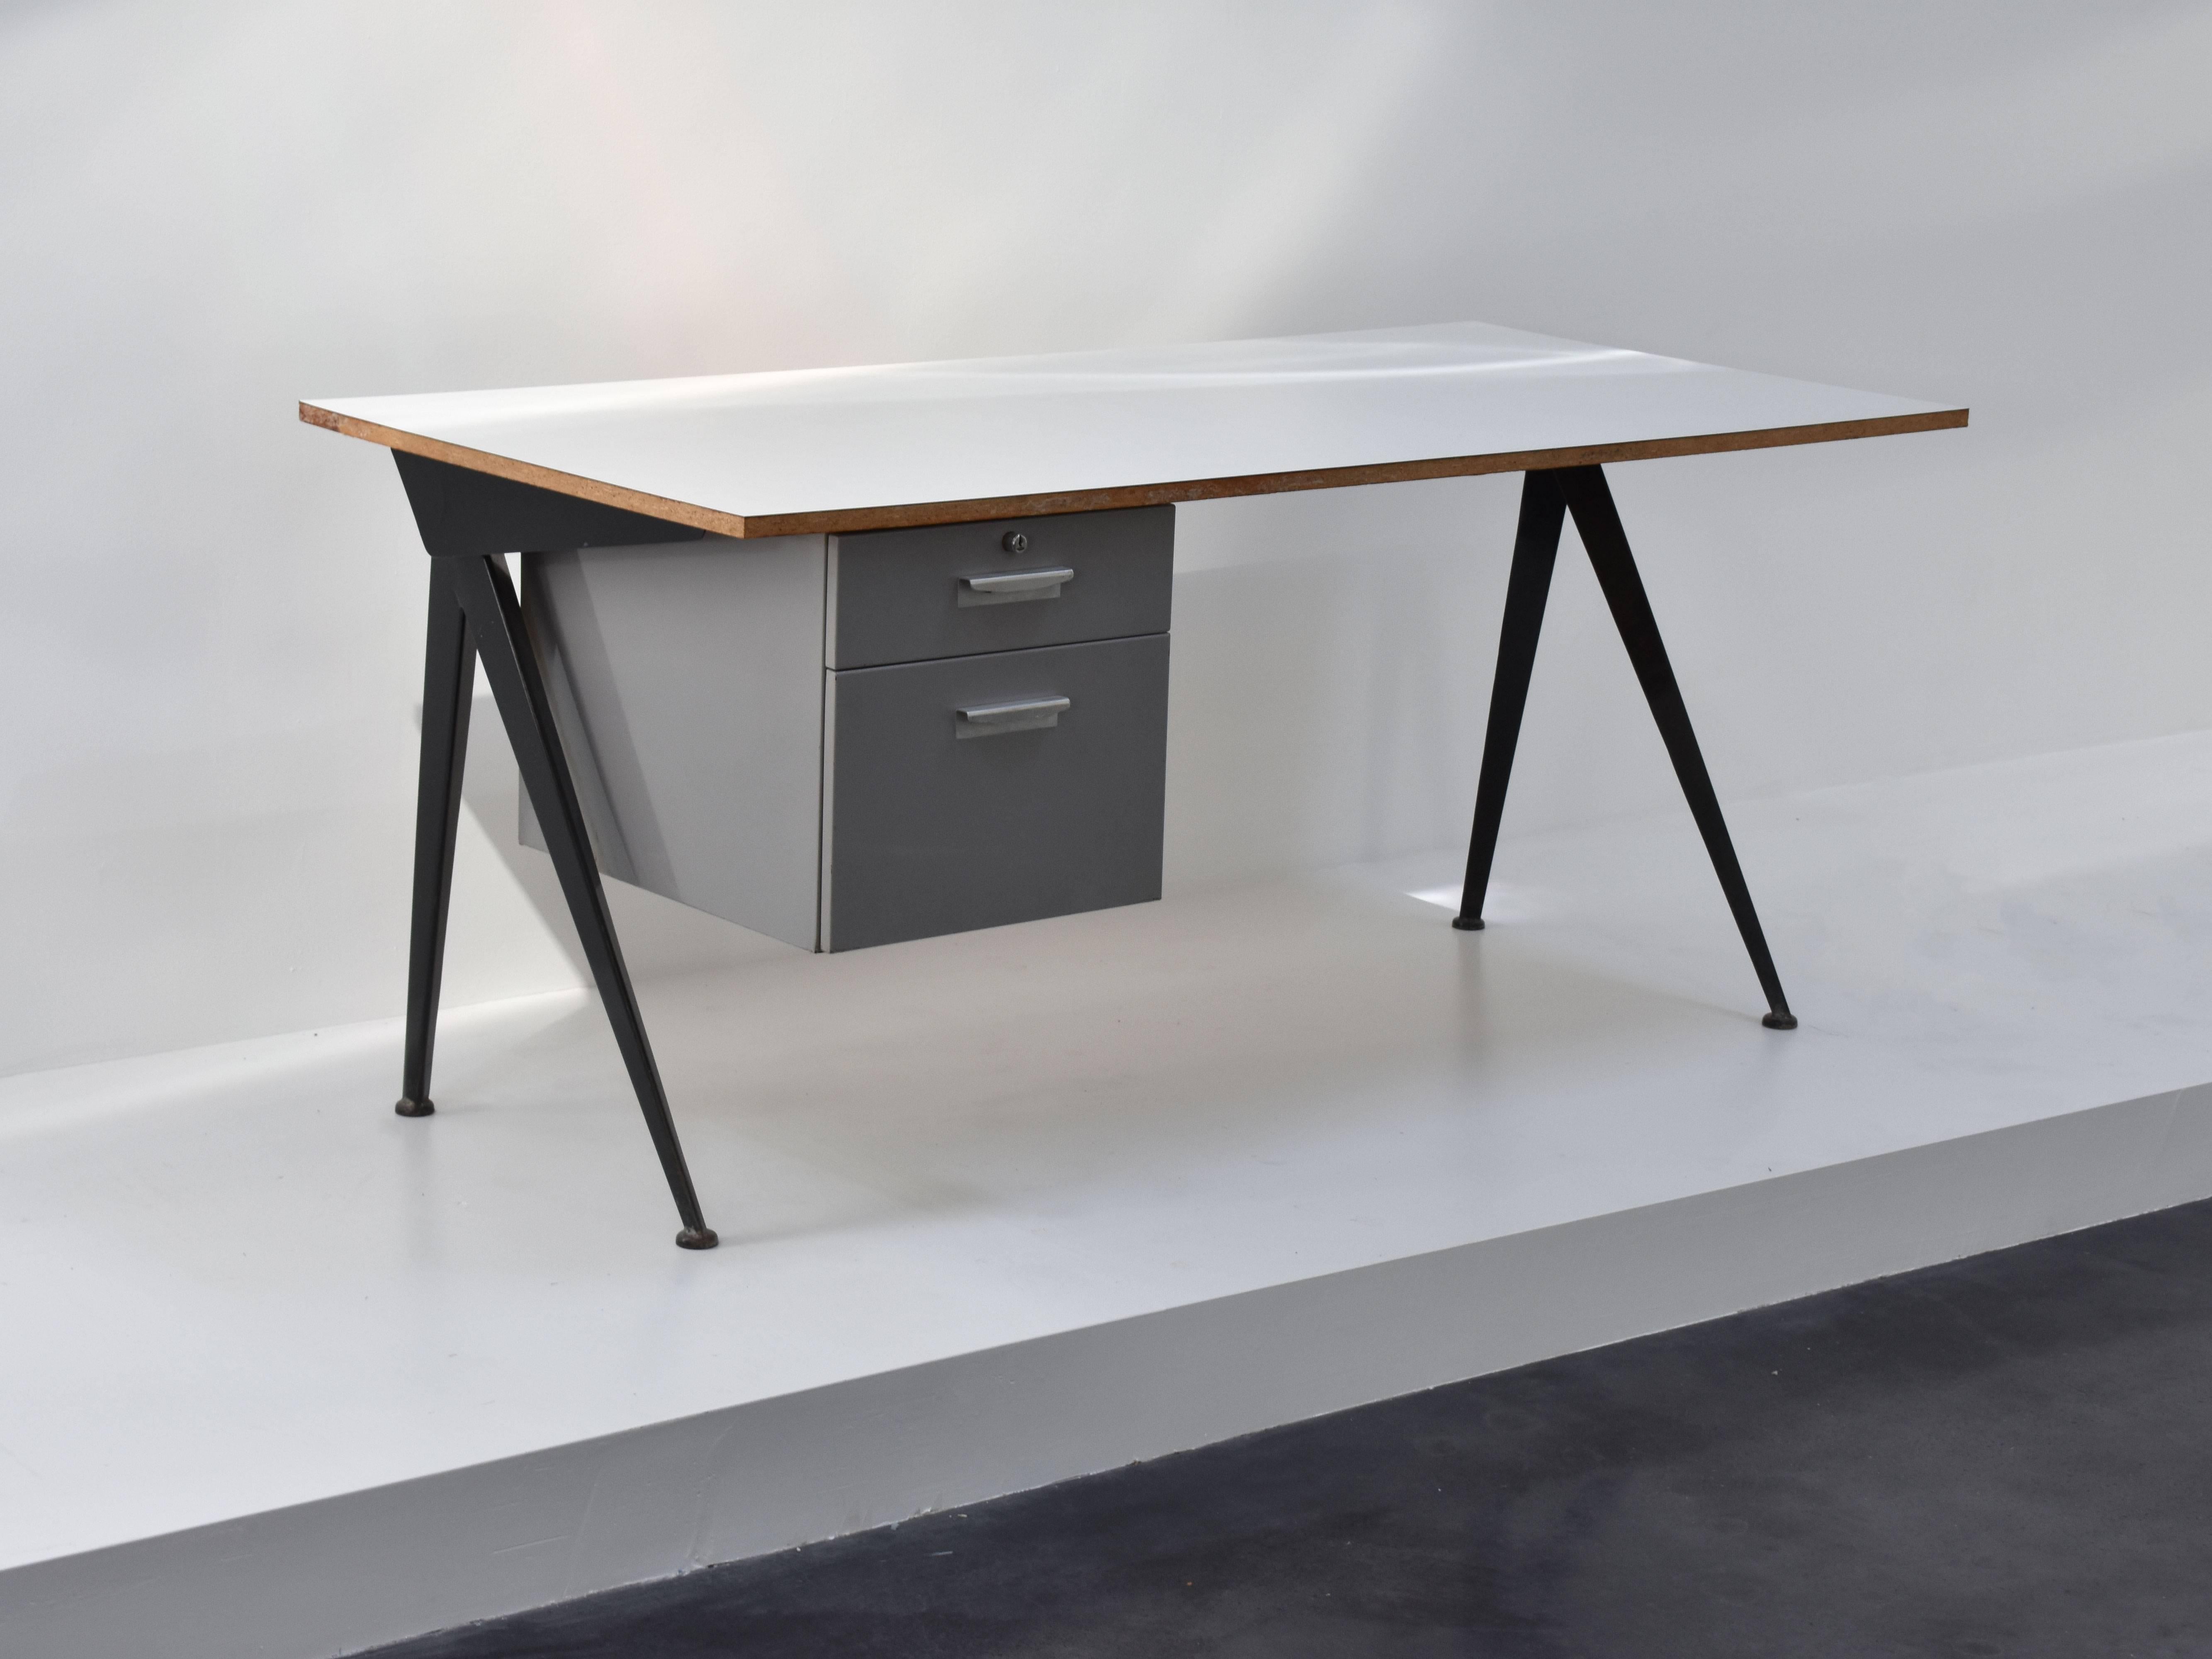 Manufactured by Les Ateliers Jean Prouvé, Nancy, France. Circa 1953, black coated steel sheet base, white Formica top, grey lacquered metal container with two drawers. An excellent example of French post war design.

Litterature.: cf. P. Sulzer,